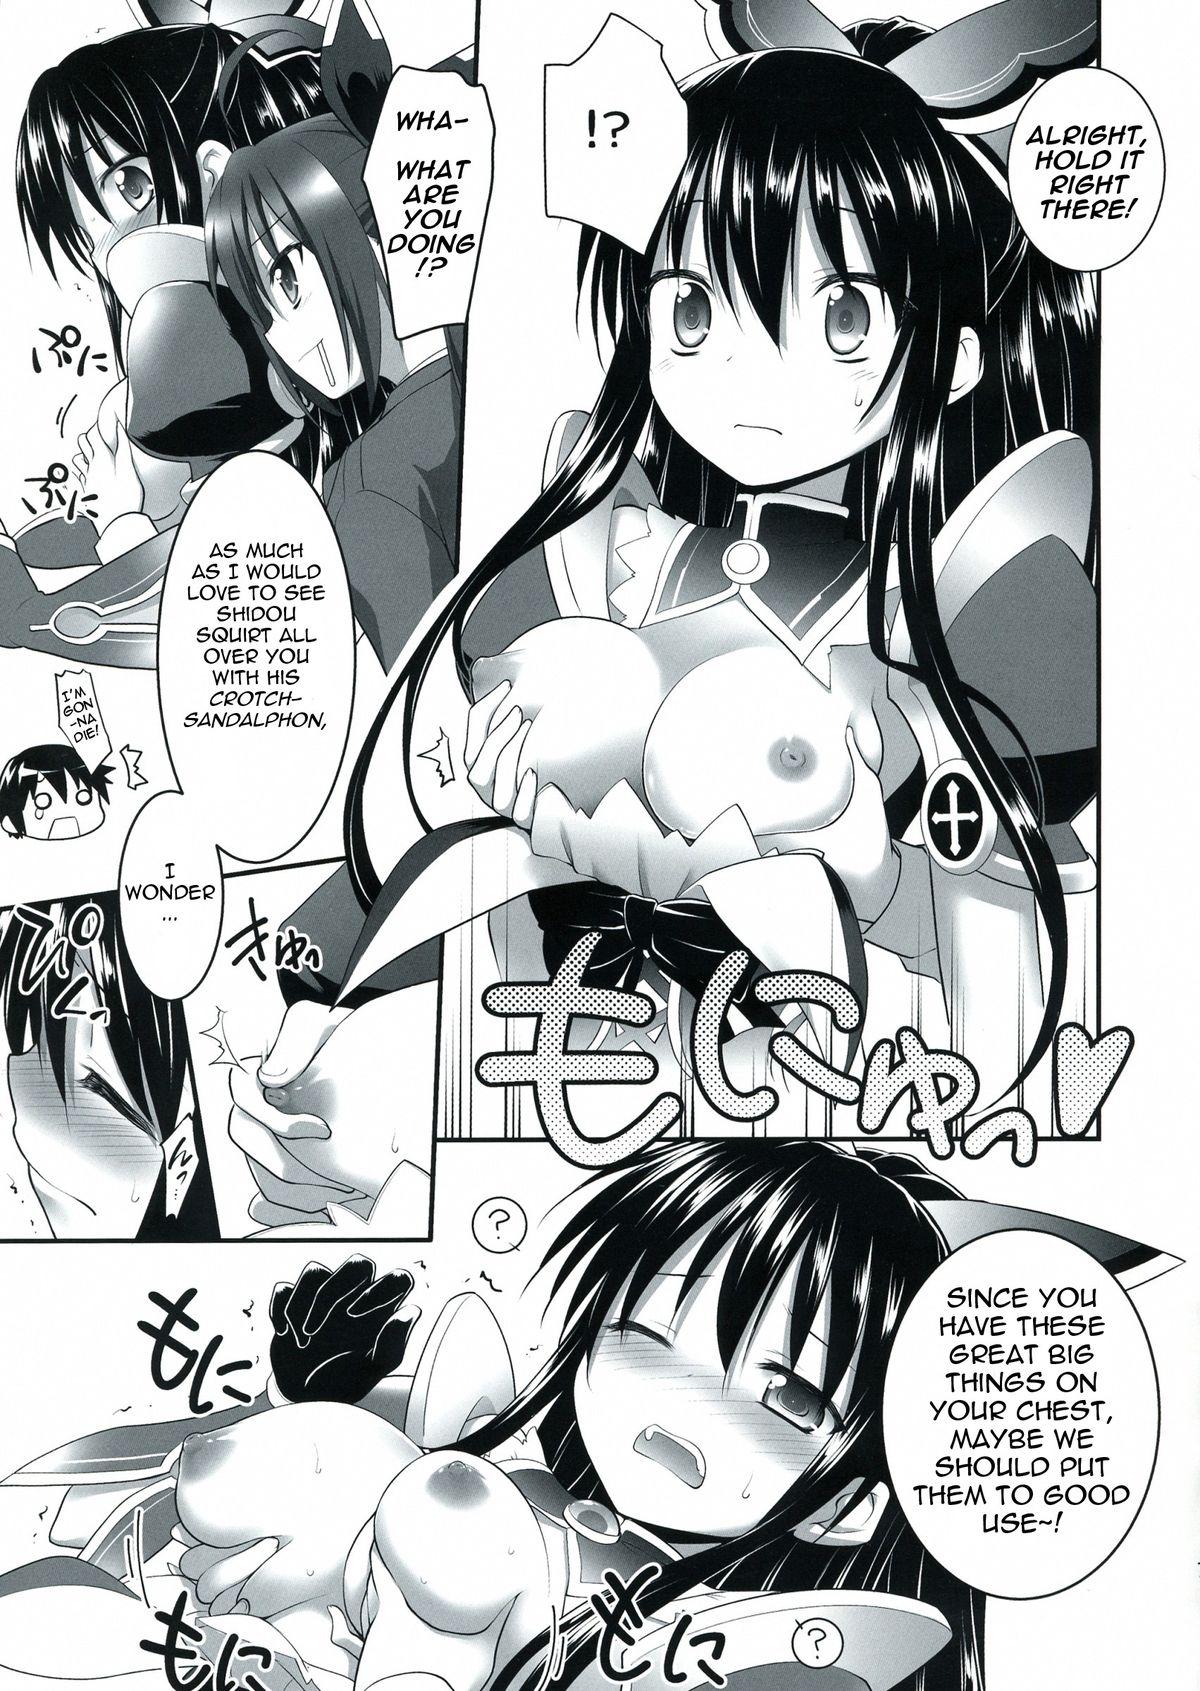 Real HIGHSCHOOL OF THE DATE - Date a live Panty - Page 7